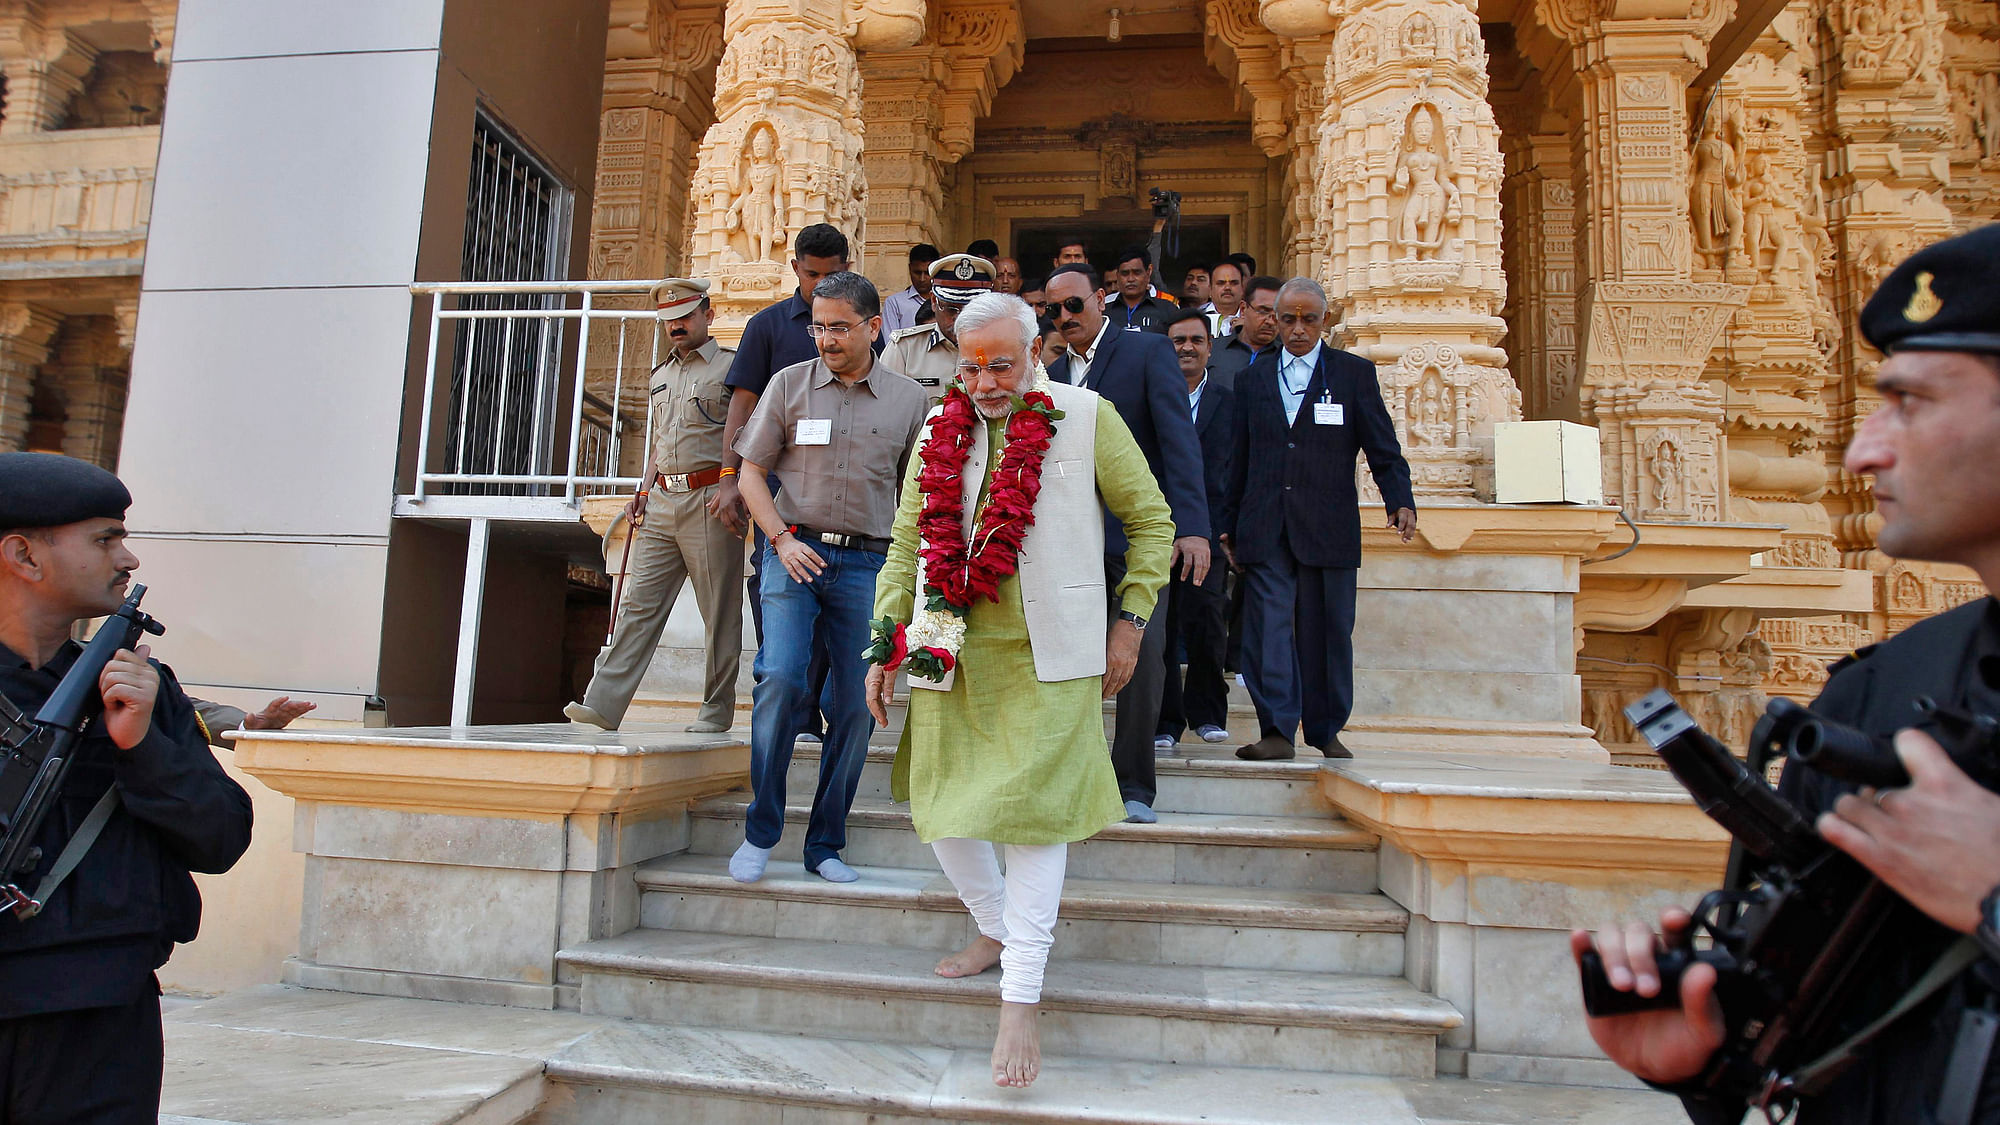 Prime Minister Narendra Modi is one of the trustees of Somnath temple (Photo: Reuters)<!--EndFragment-->